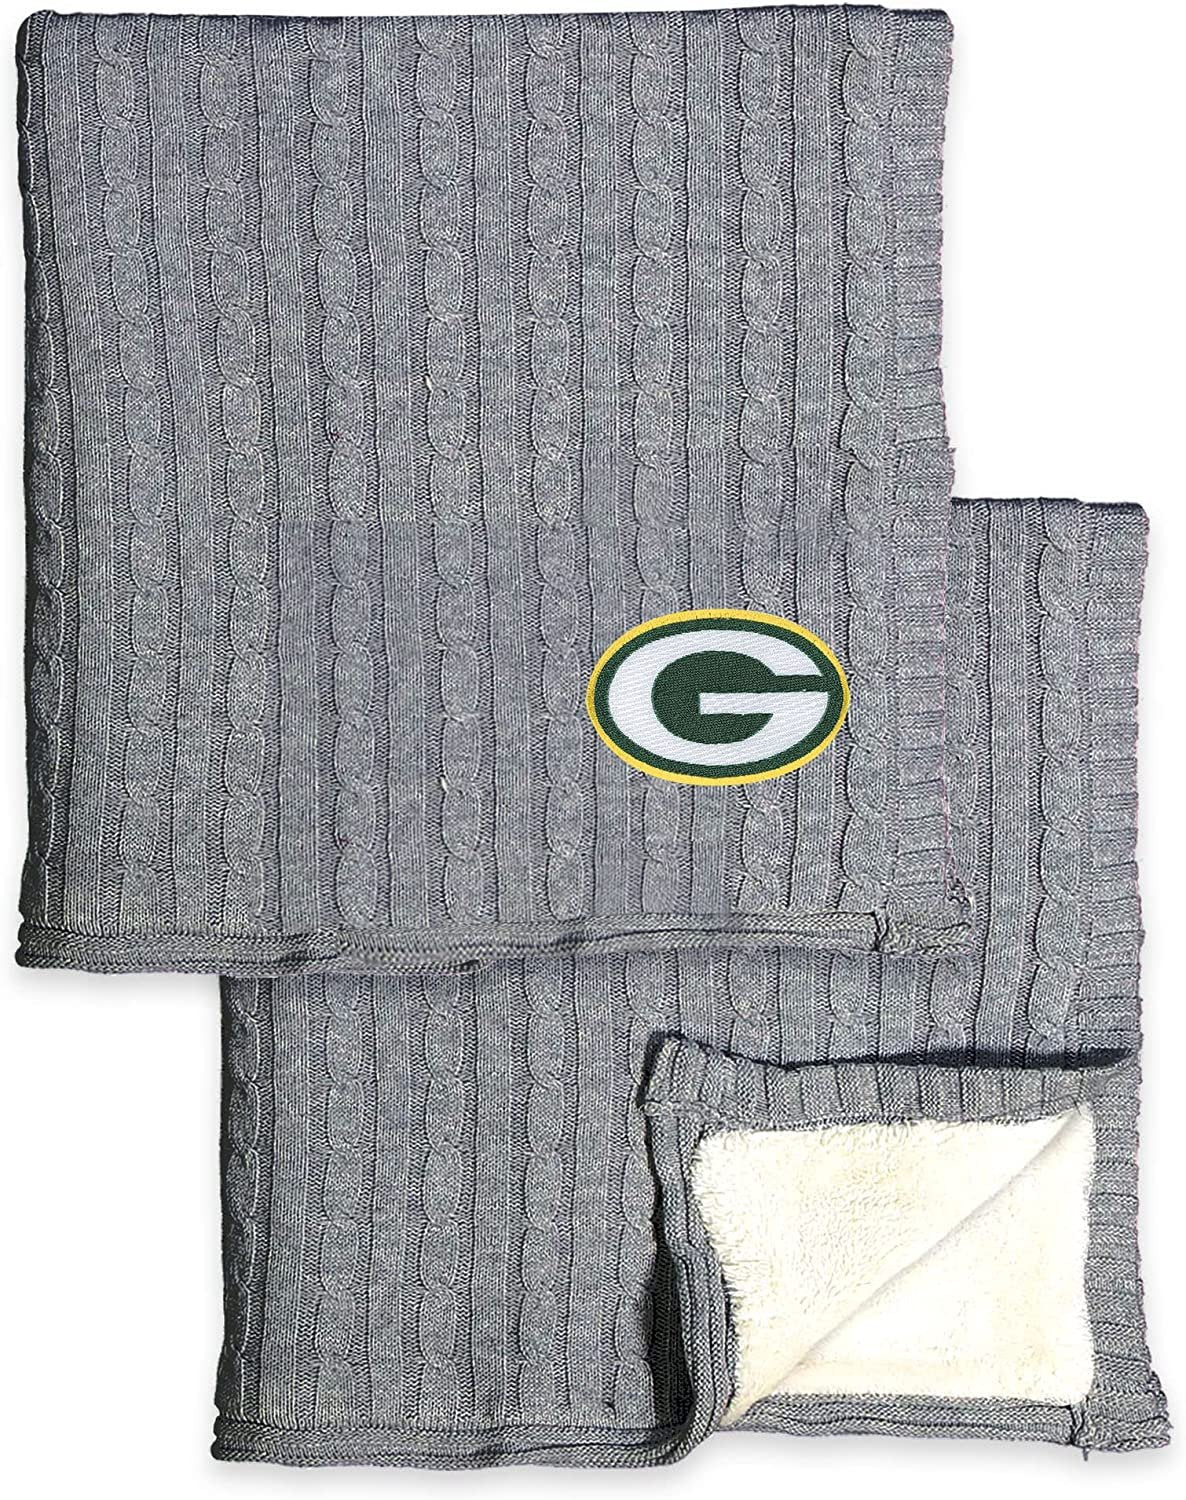 Green Bay Packers Cable Sweater Knit Sherpa Throw Blanket 50x60 Inch Adult